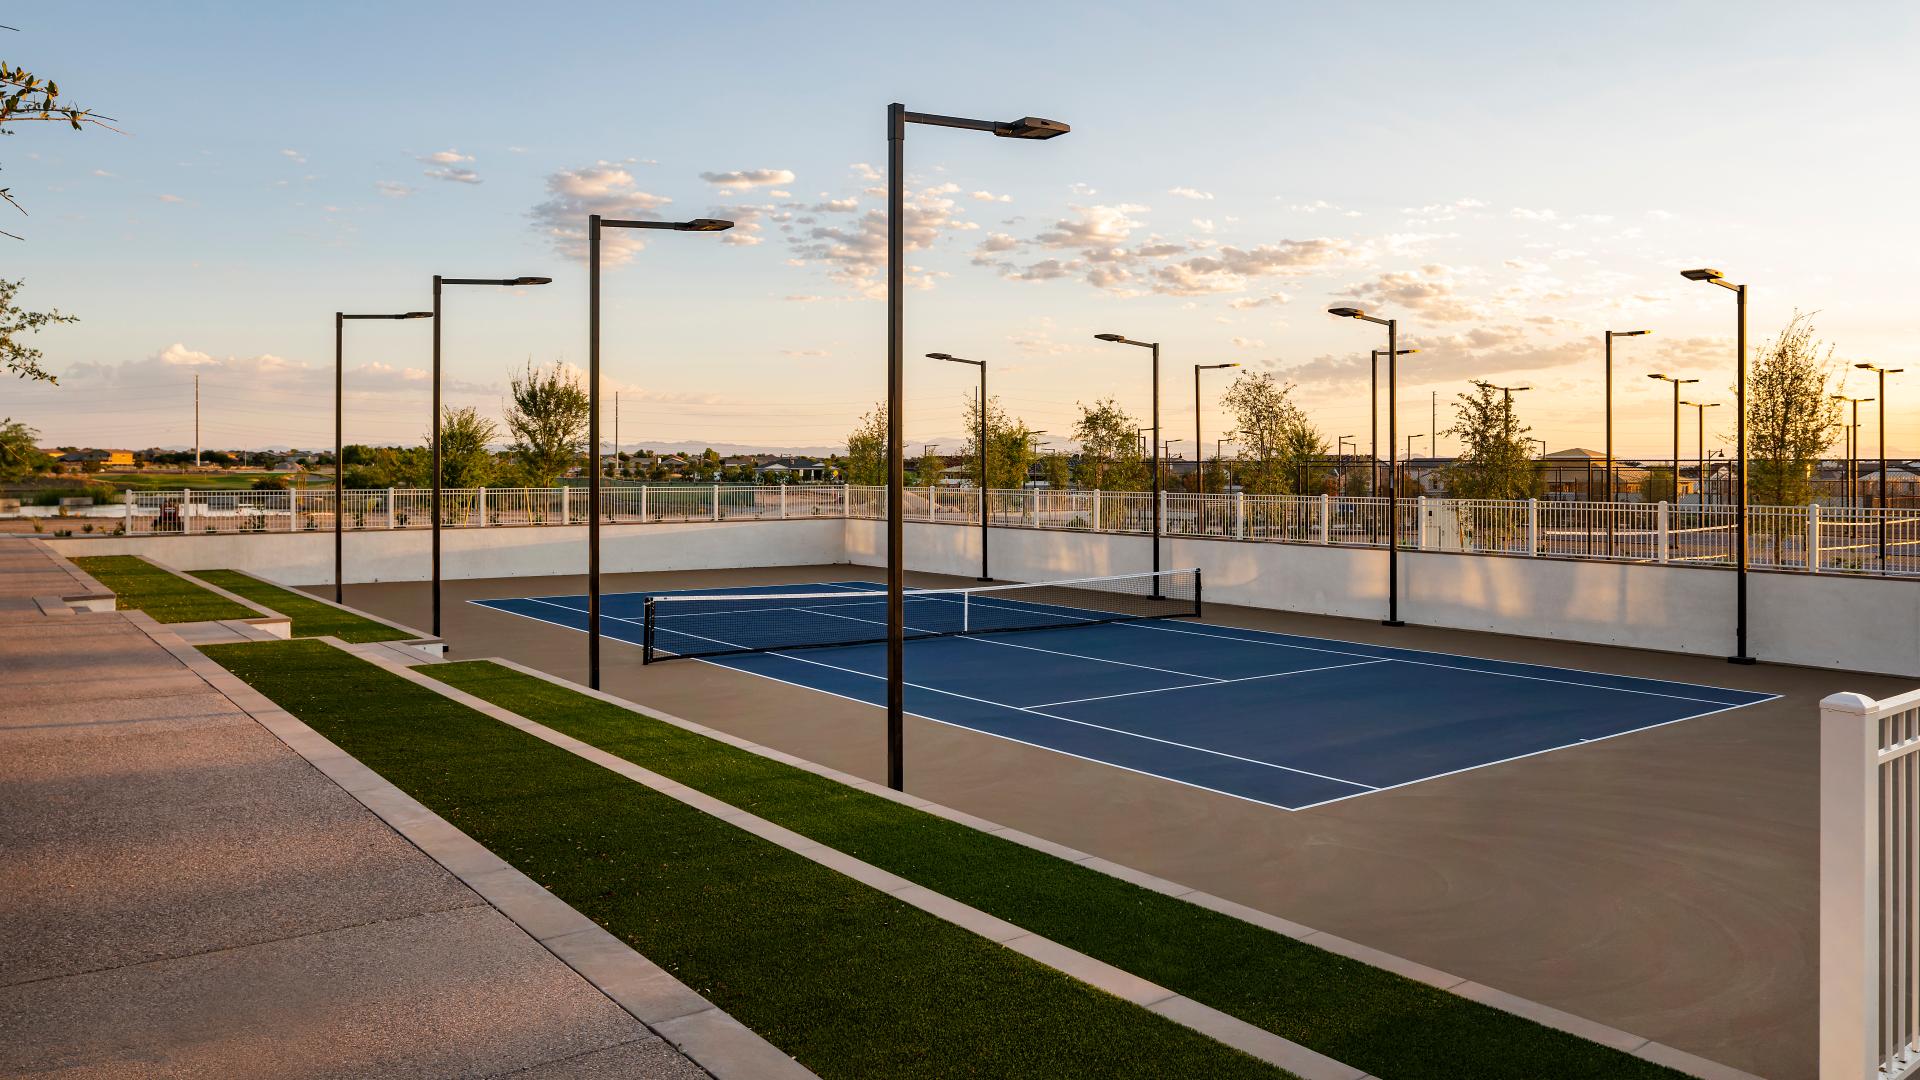 Tennis, pickleball, and bocce ball courts for year-round enjoyment